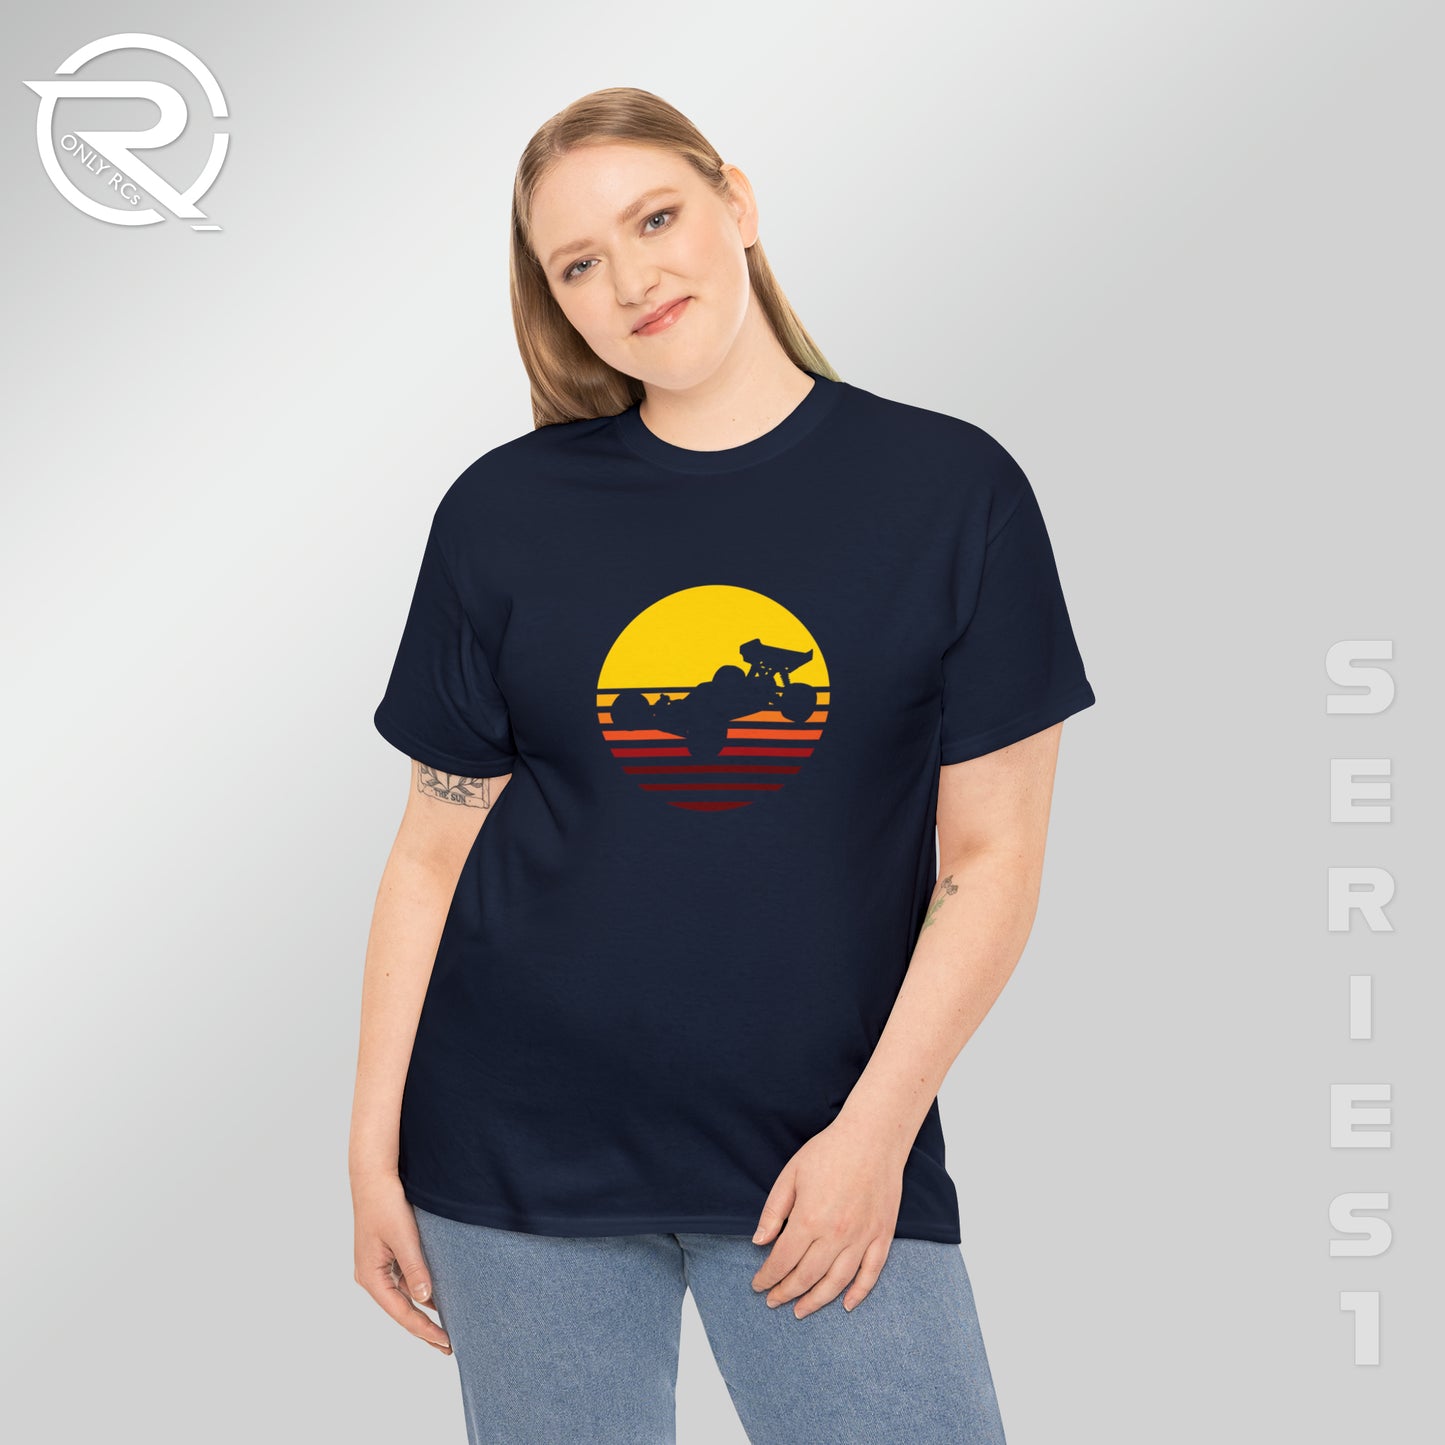 OnlyRCs - Sunset Fade Buggy Silhouette Unisex Heavy Cotton Tee - Series 1